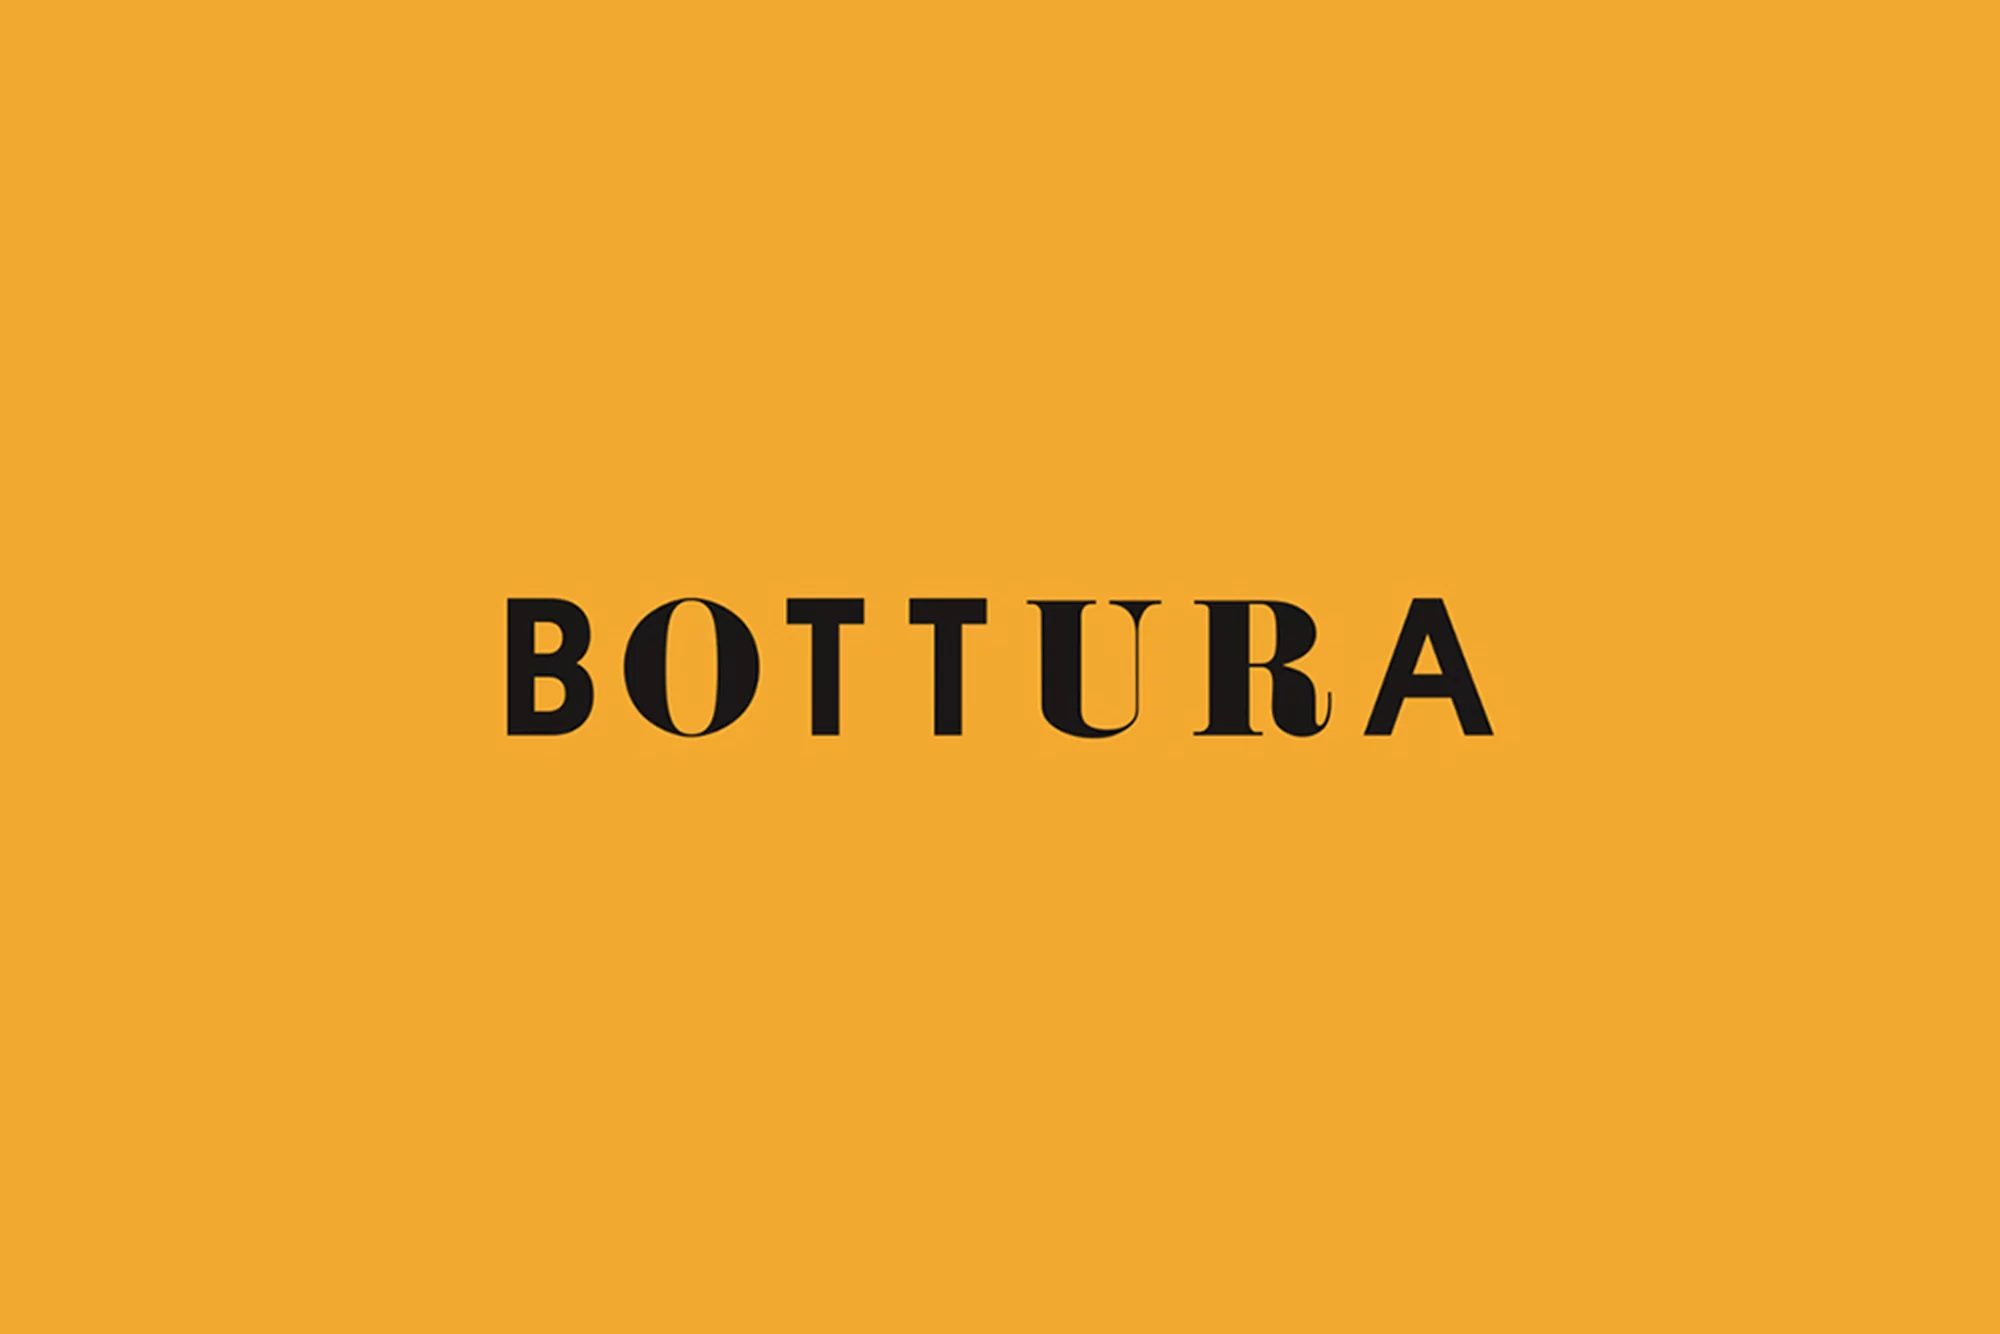 Bottura by Foreign Policy